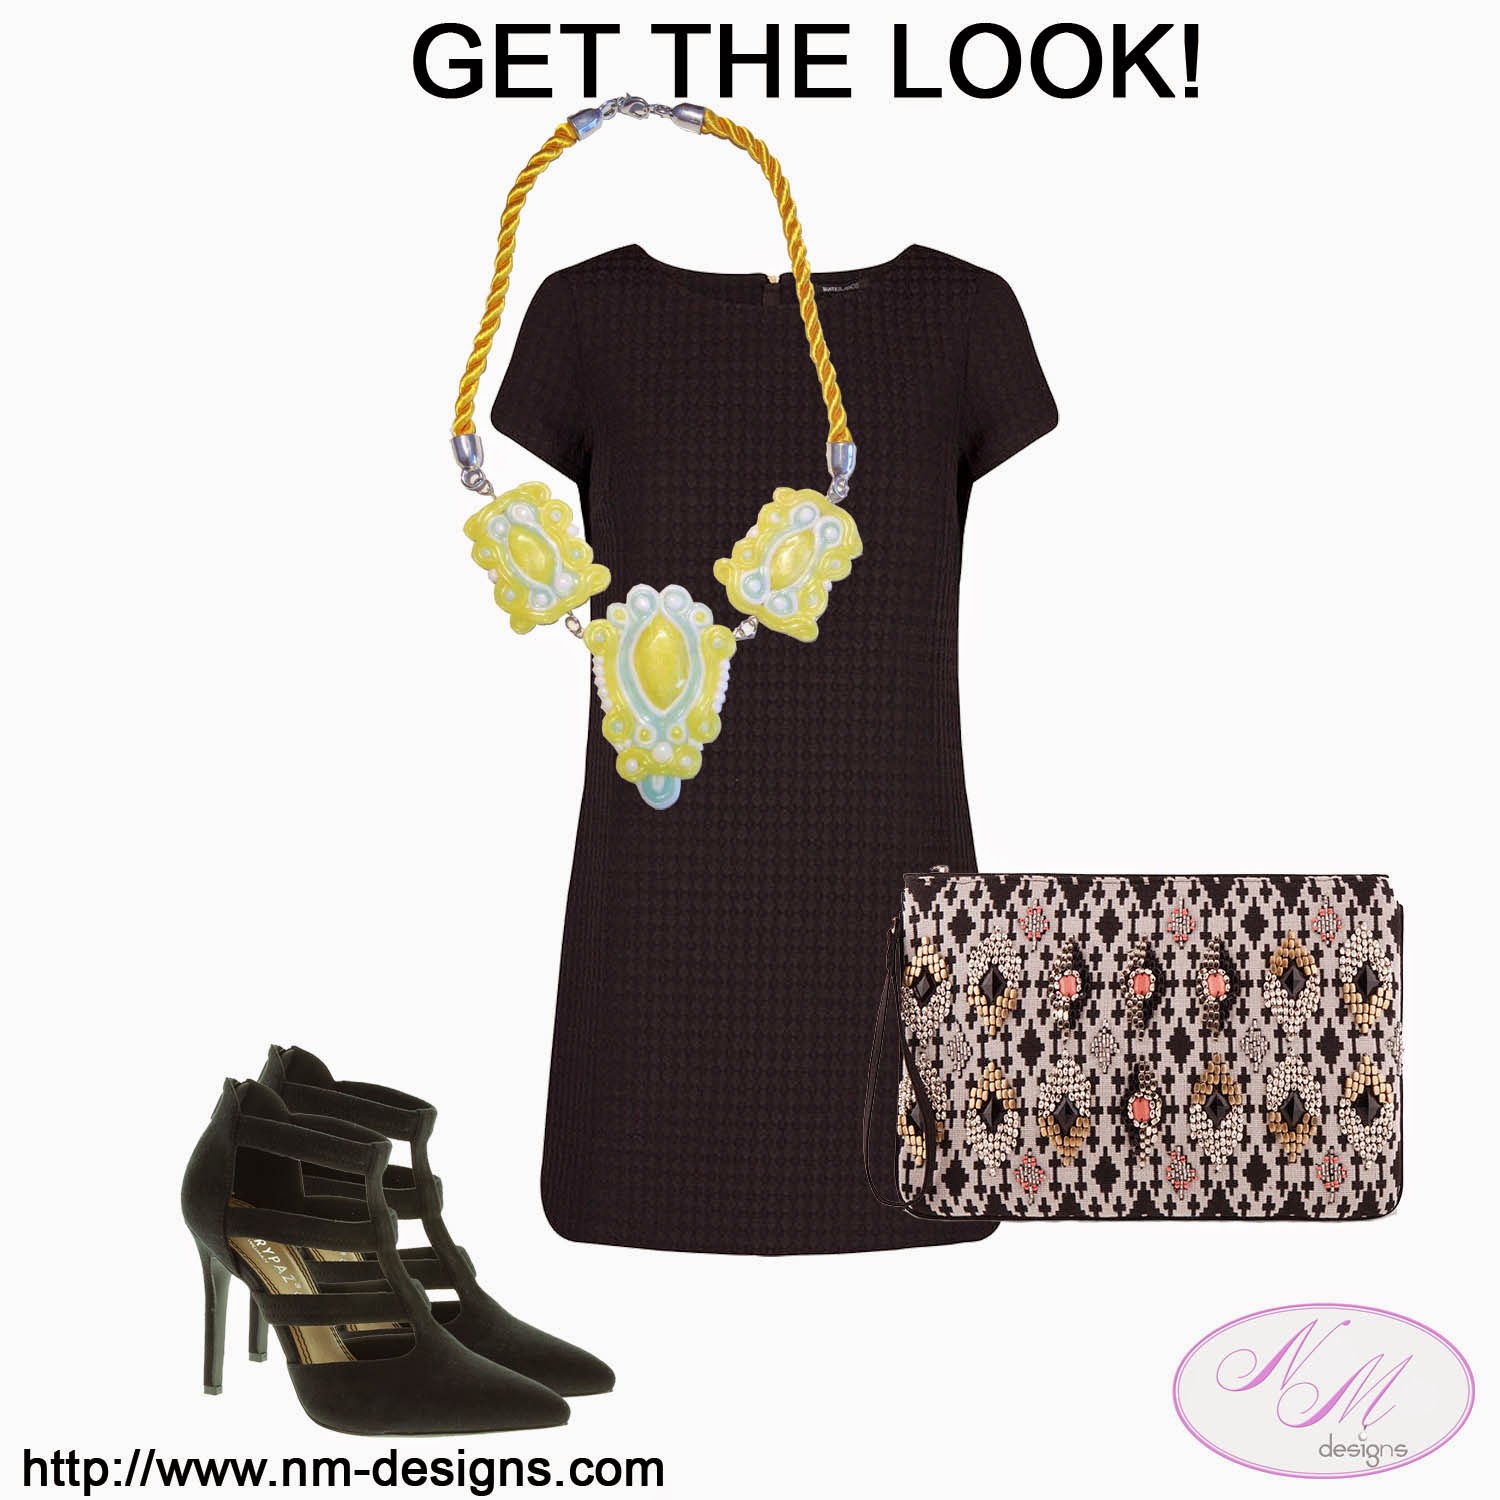 "GET THE LOOK" from September 17, 2014